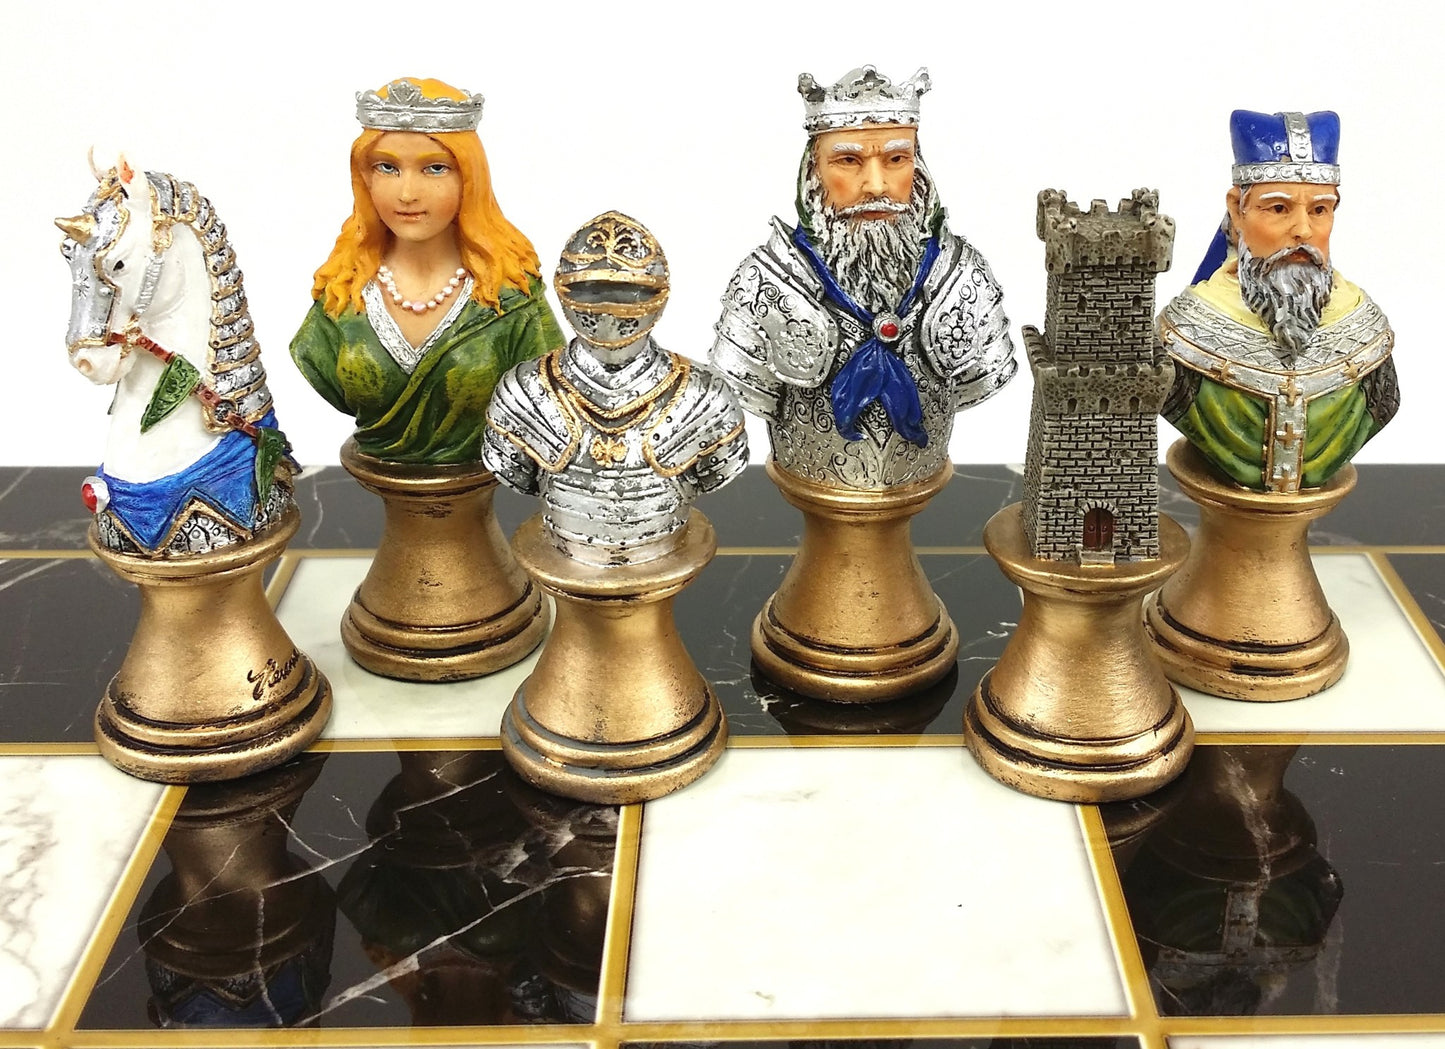 Medieval Times Crusade Busts Painted Chess Set 17" Black White Faux Marble Board